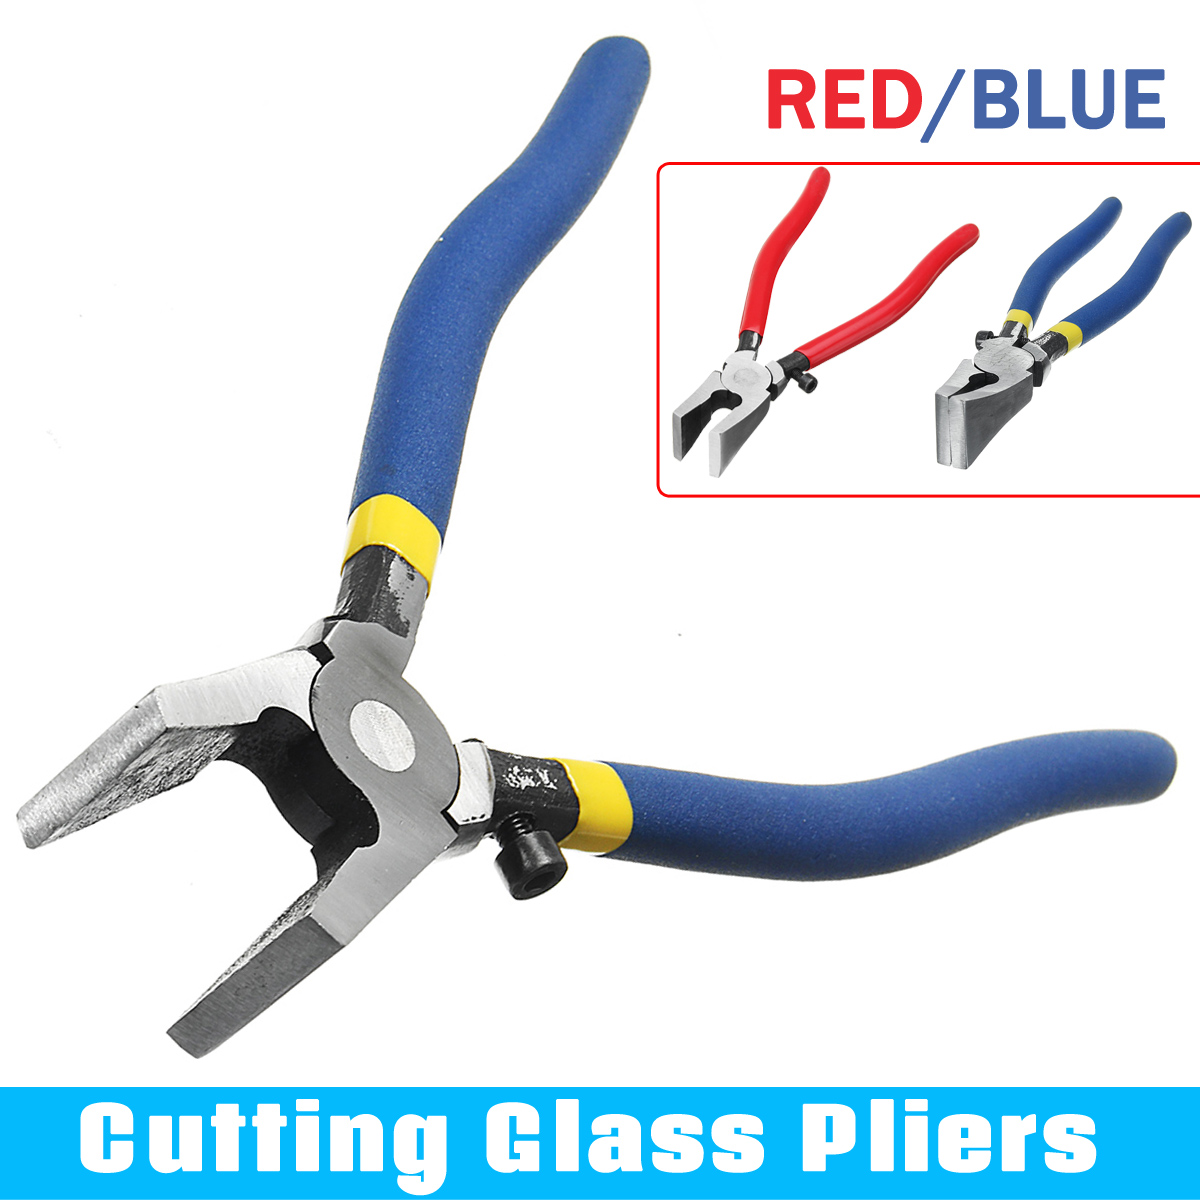 Stained-Glass-Tool-Kit-Running-Pliers-Breaking-Grozing-Pliers-Grip-Cutter-Non-slip-Handle-1334030-4